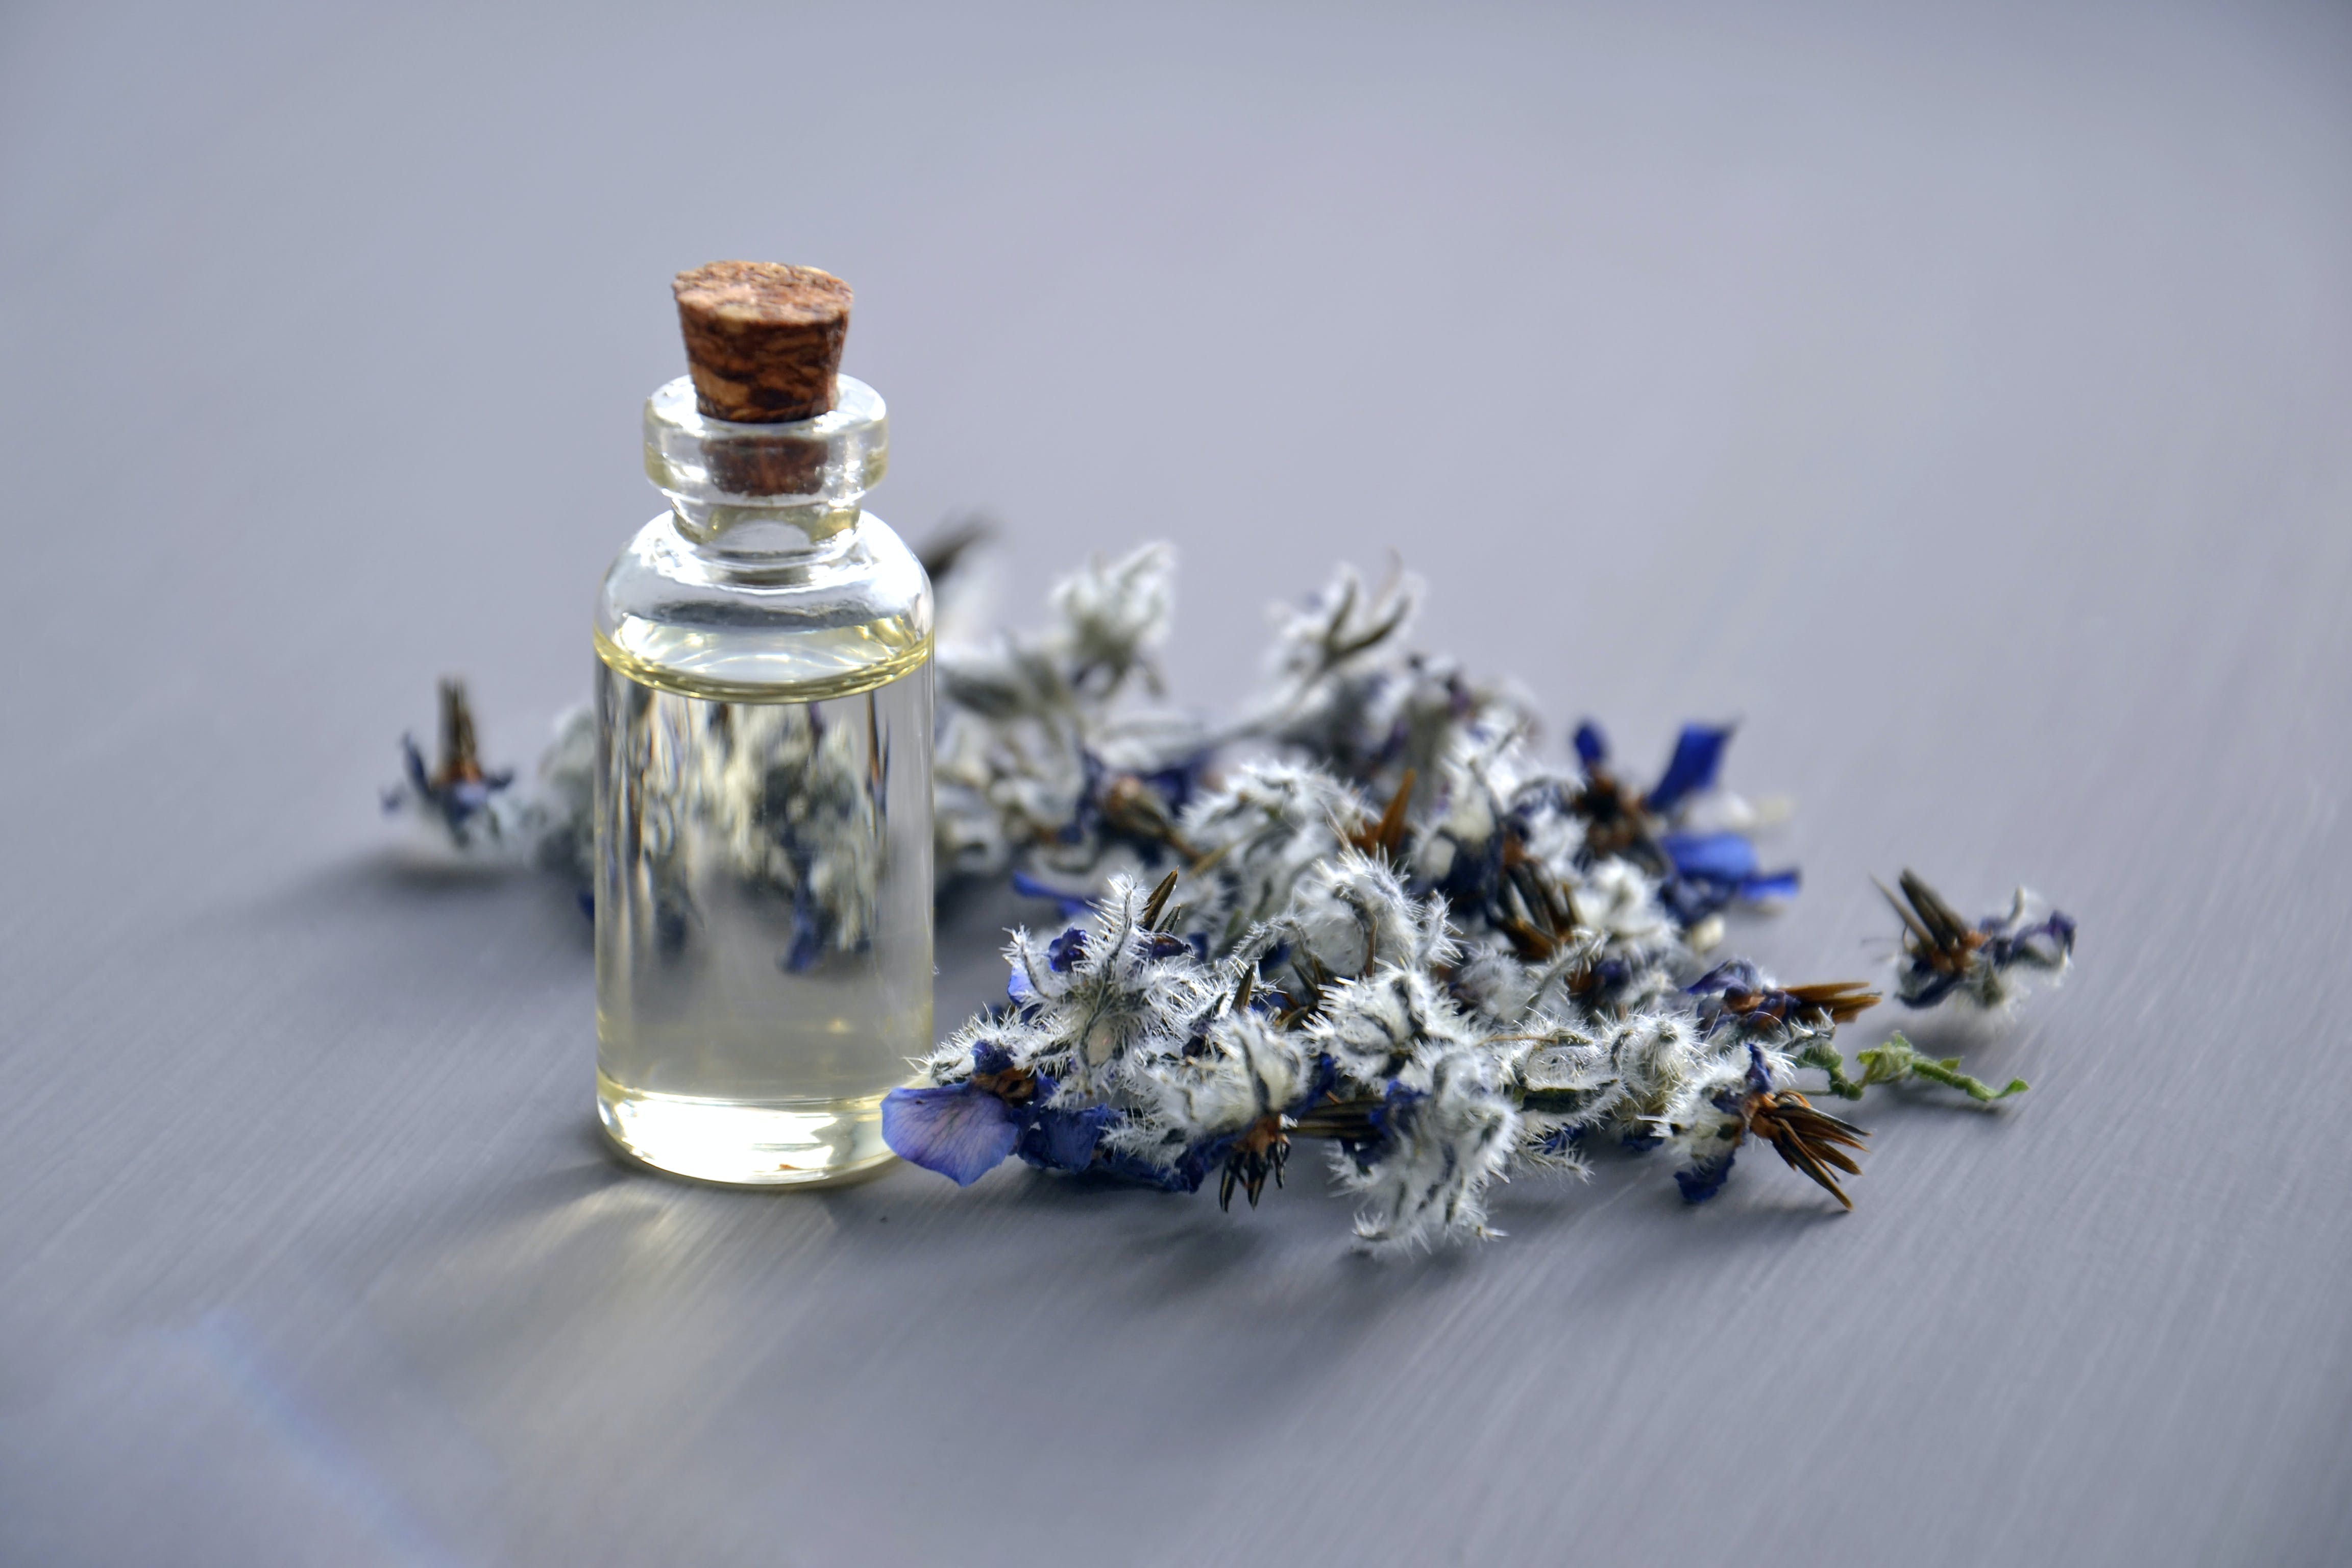 The Science Behind Essential Oils